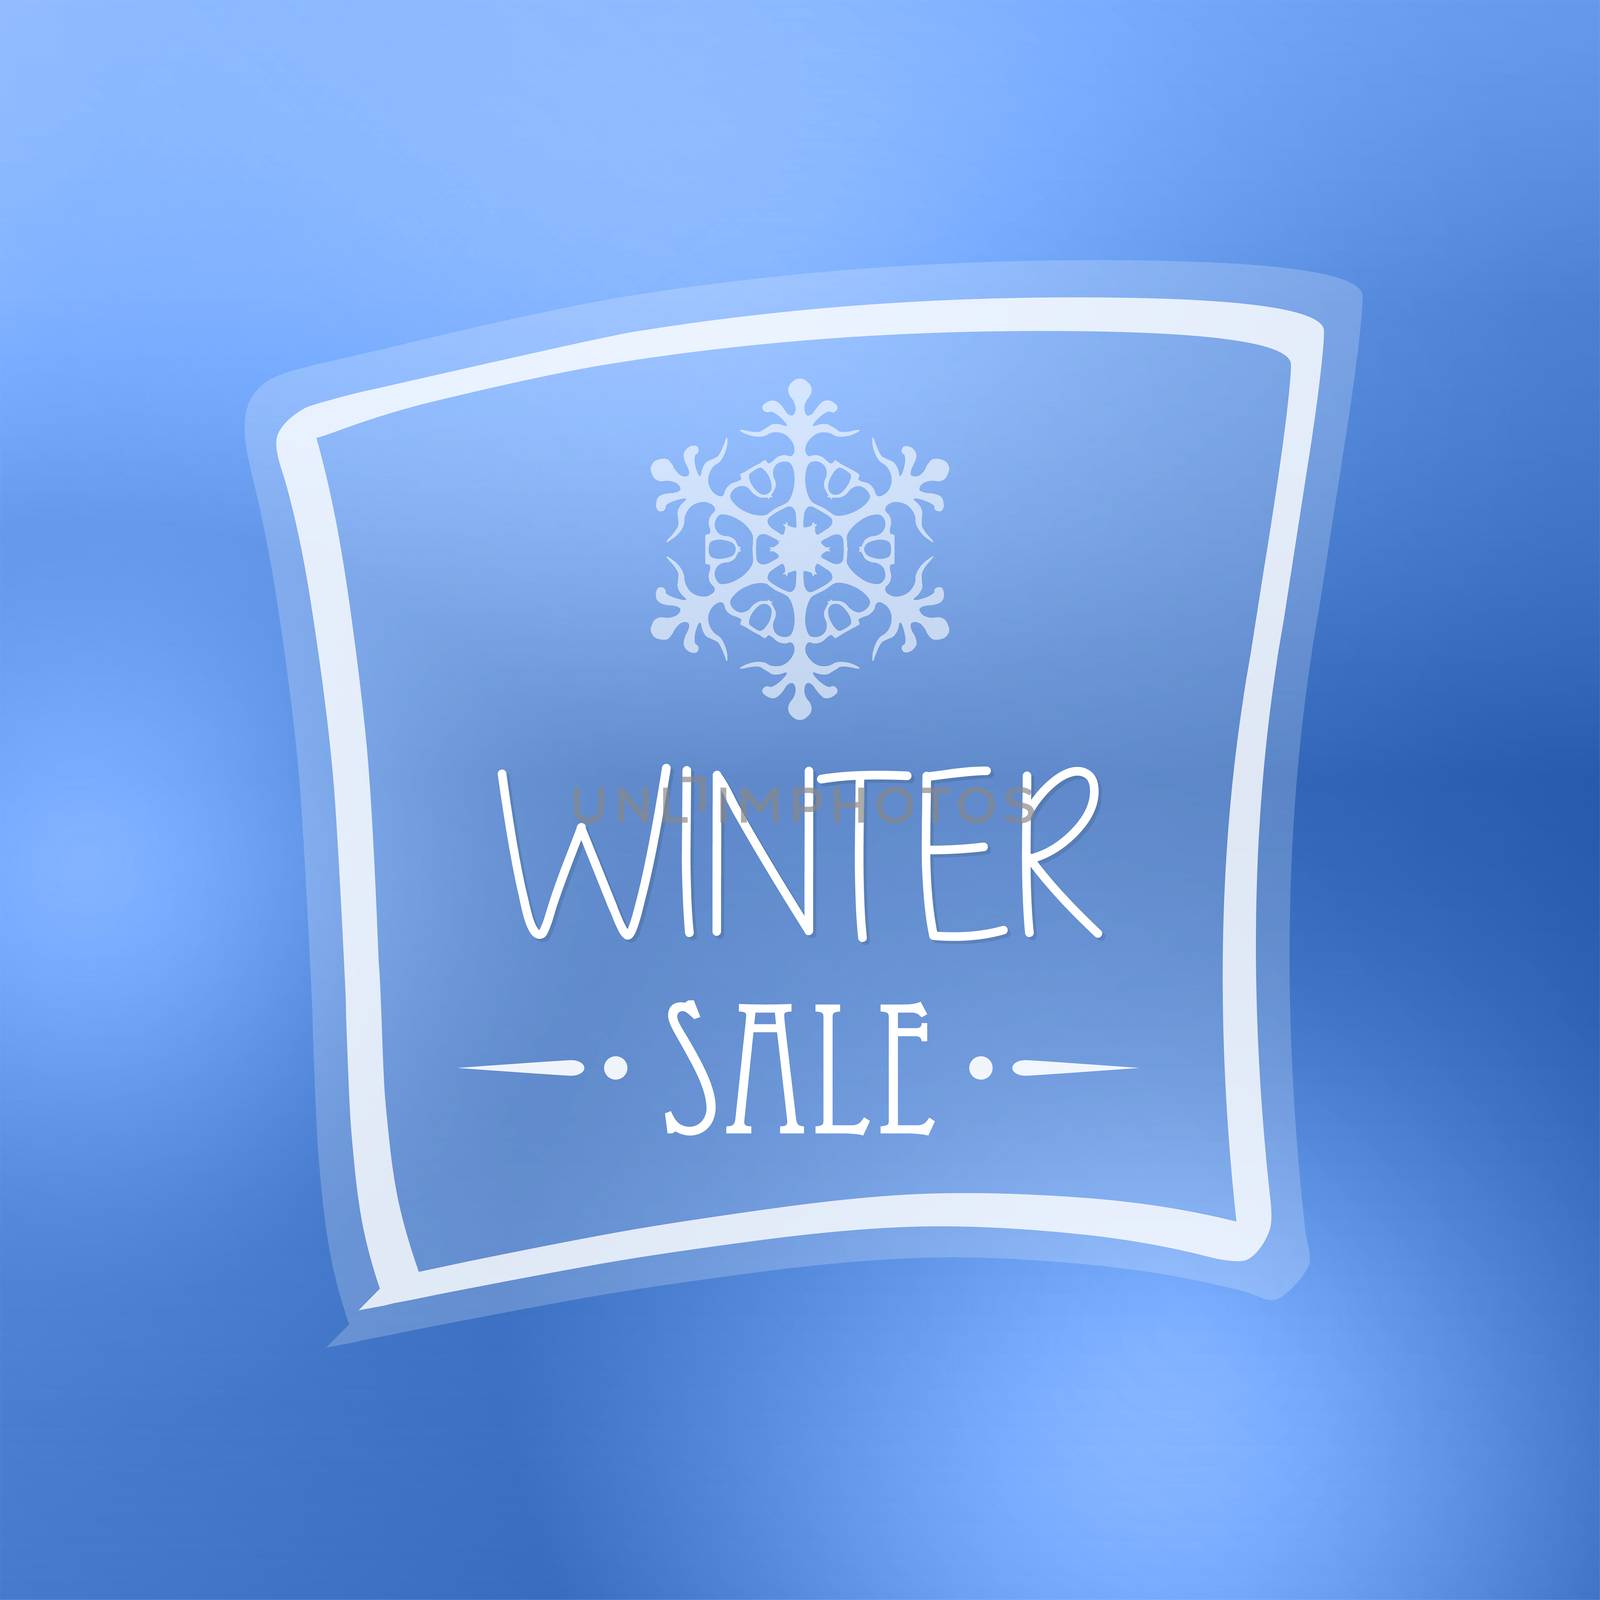 text winter sale with snowflake in frame over blue background